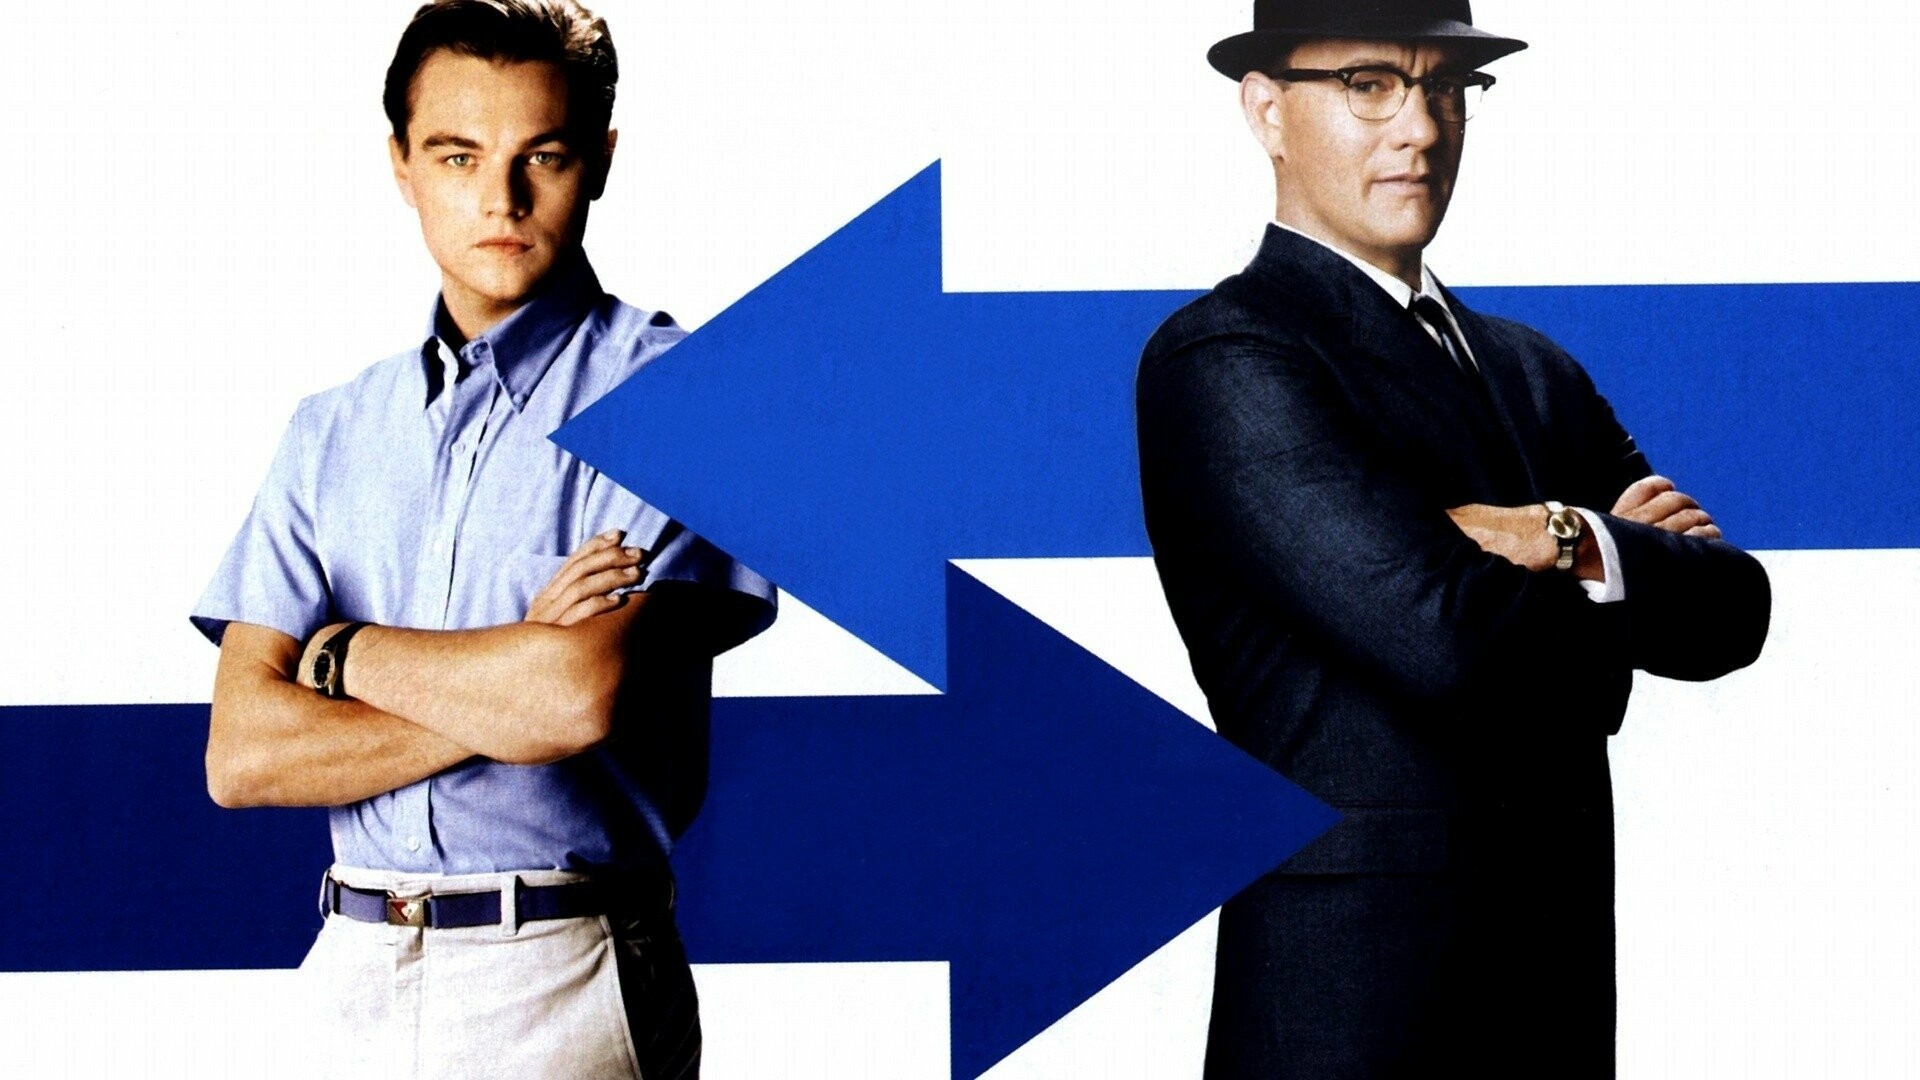 Catch Me If You Can: The film opened on December 25, 2002, Leonardo DiCaprio, Tom Hanks. 1920x1080 Full HD Background.